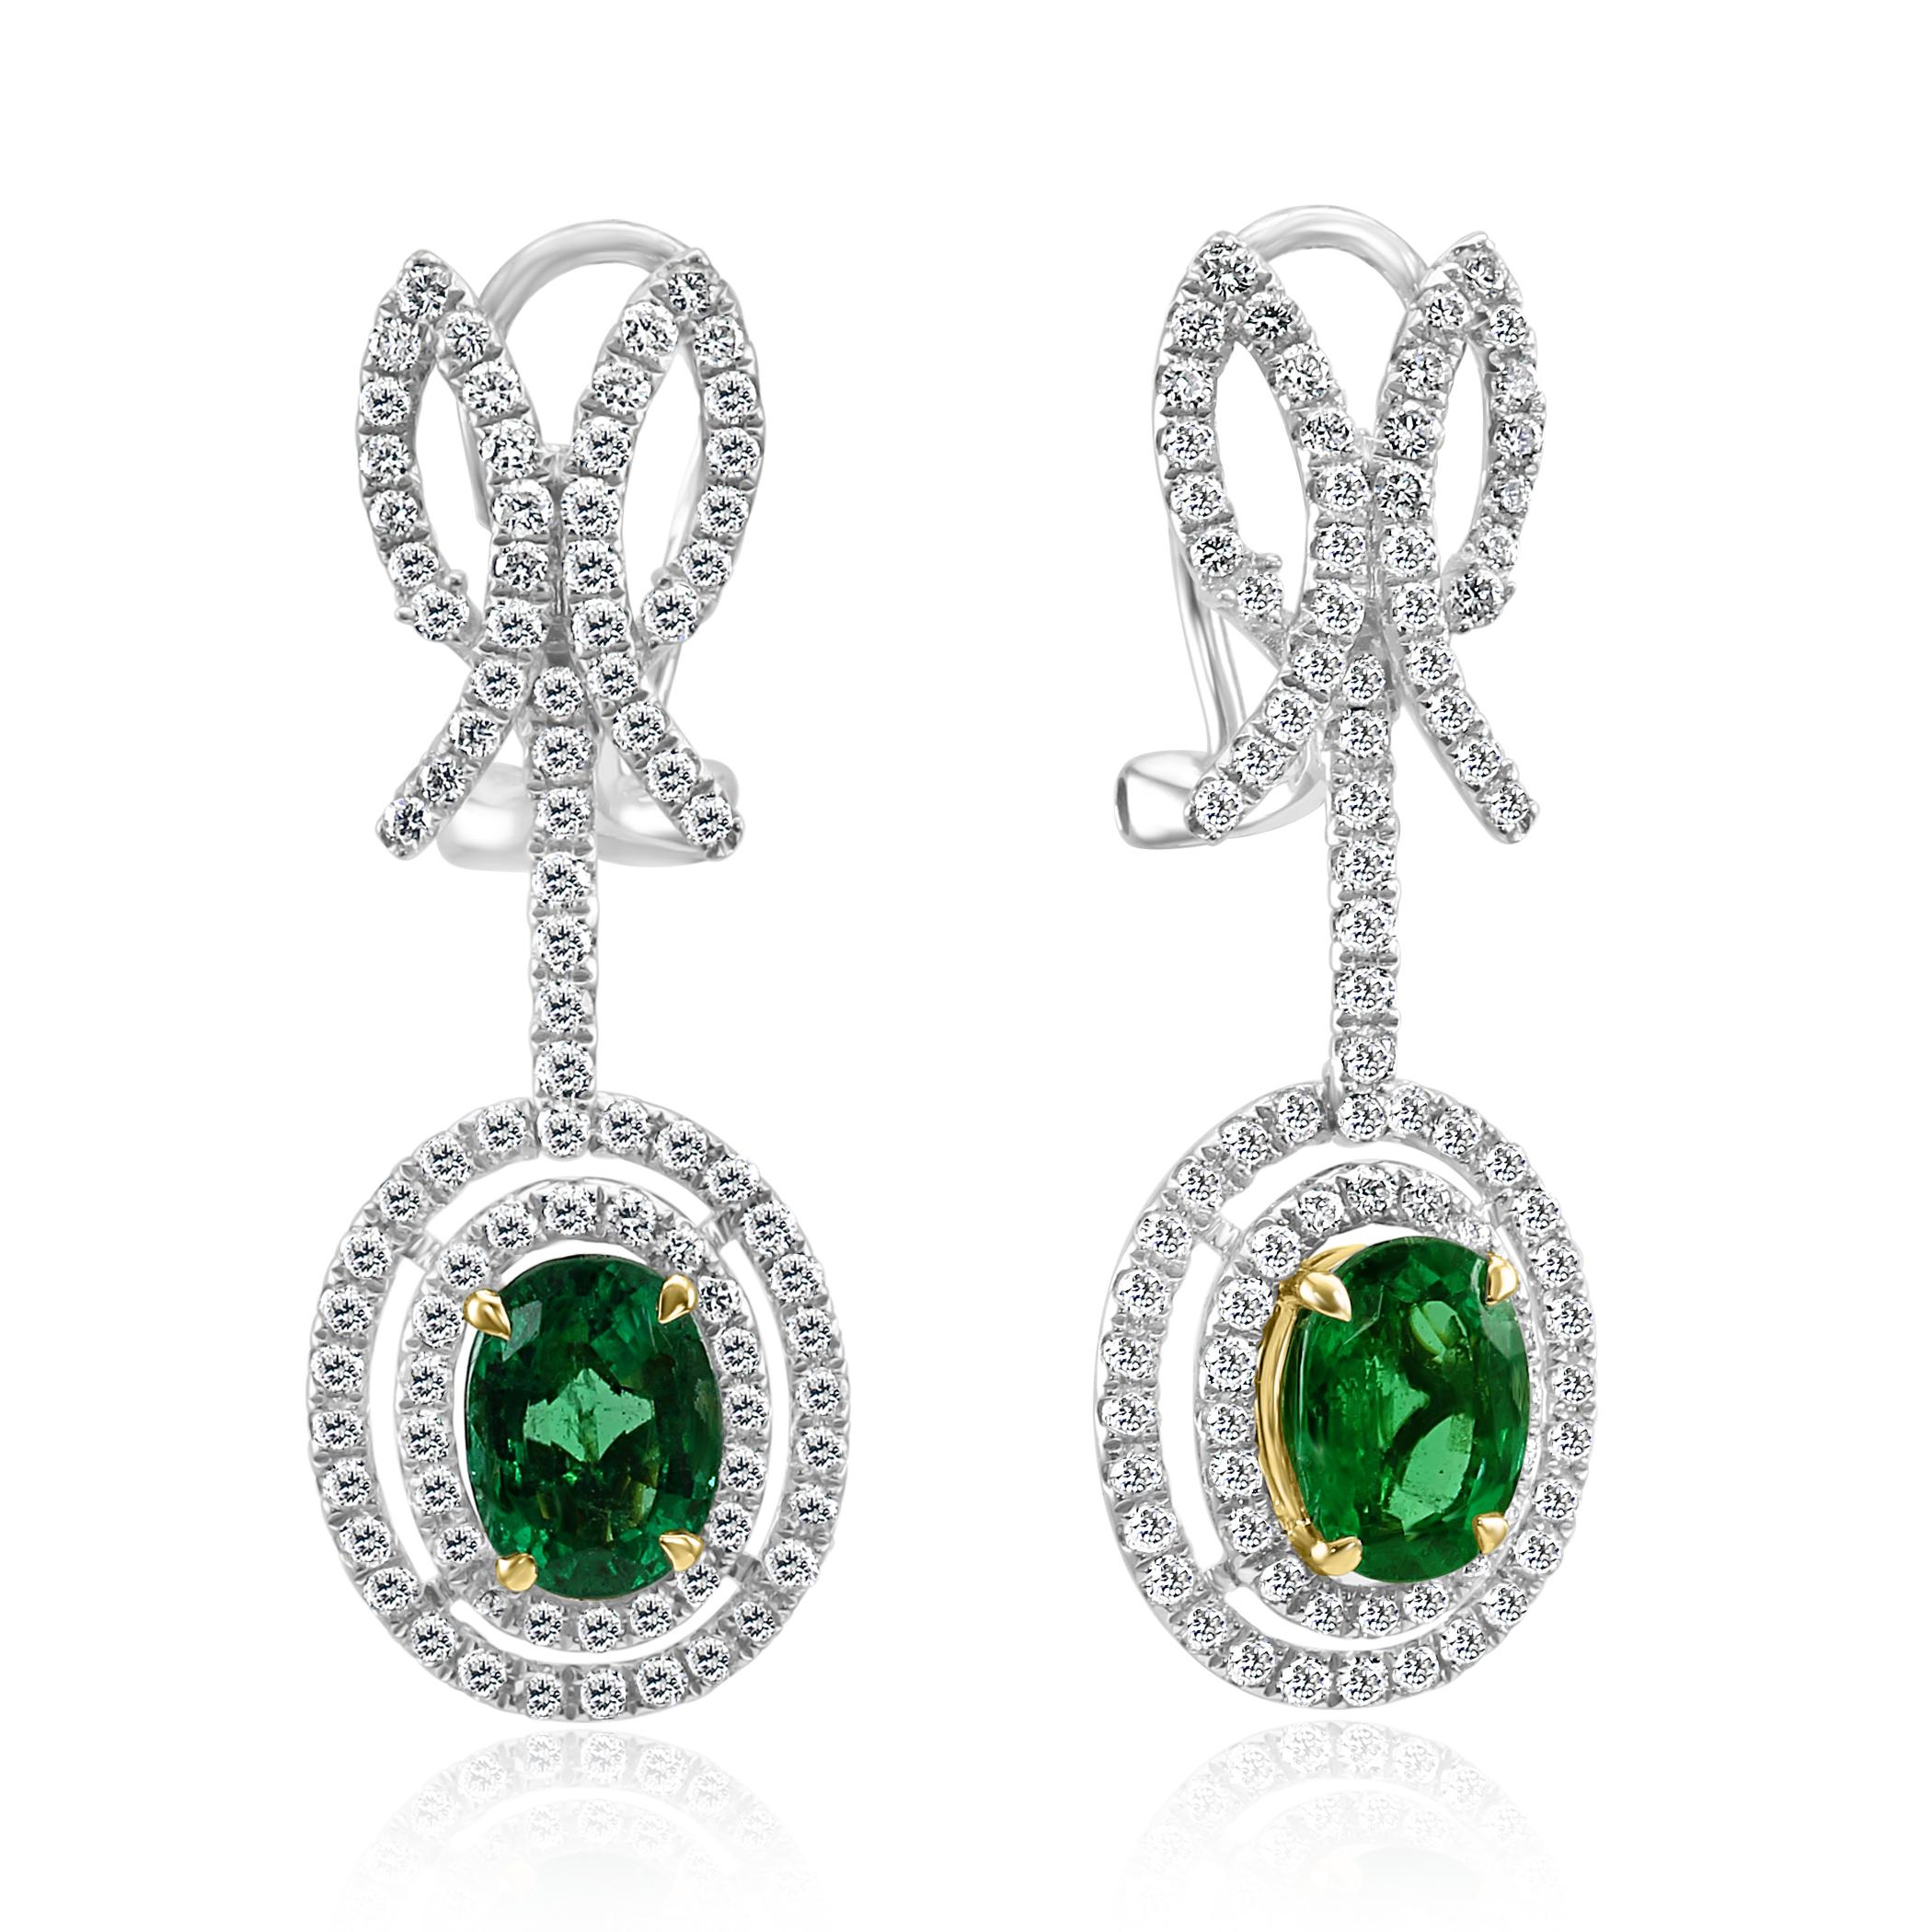 2 Gorgeous Emerald oval 2.60 Carat set in Double Halo of 178 White G-H Color VS-SI Clarity Diamond Rounds 1.60 Carat set in 18K White and Yellow Gold Fashion Dangle Drop Earring.

 Total Stone Weight 4.20 Carat

Style available in different price